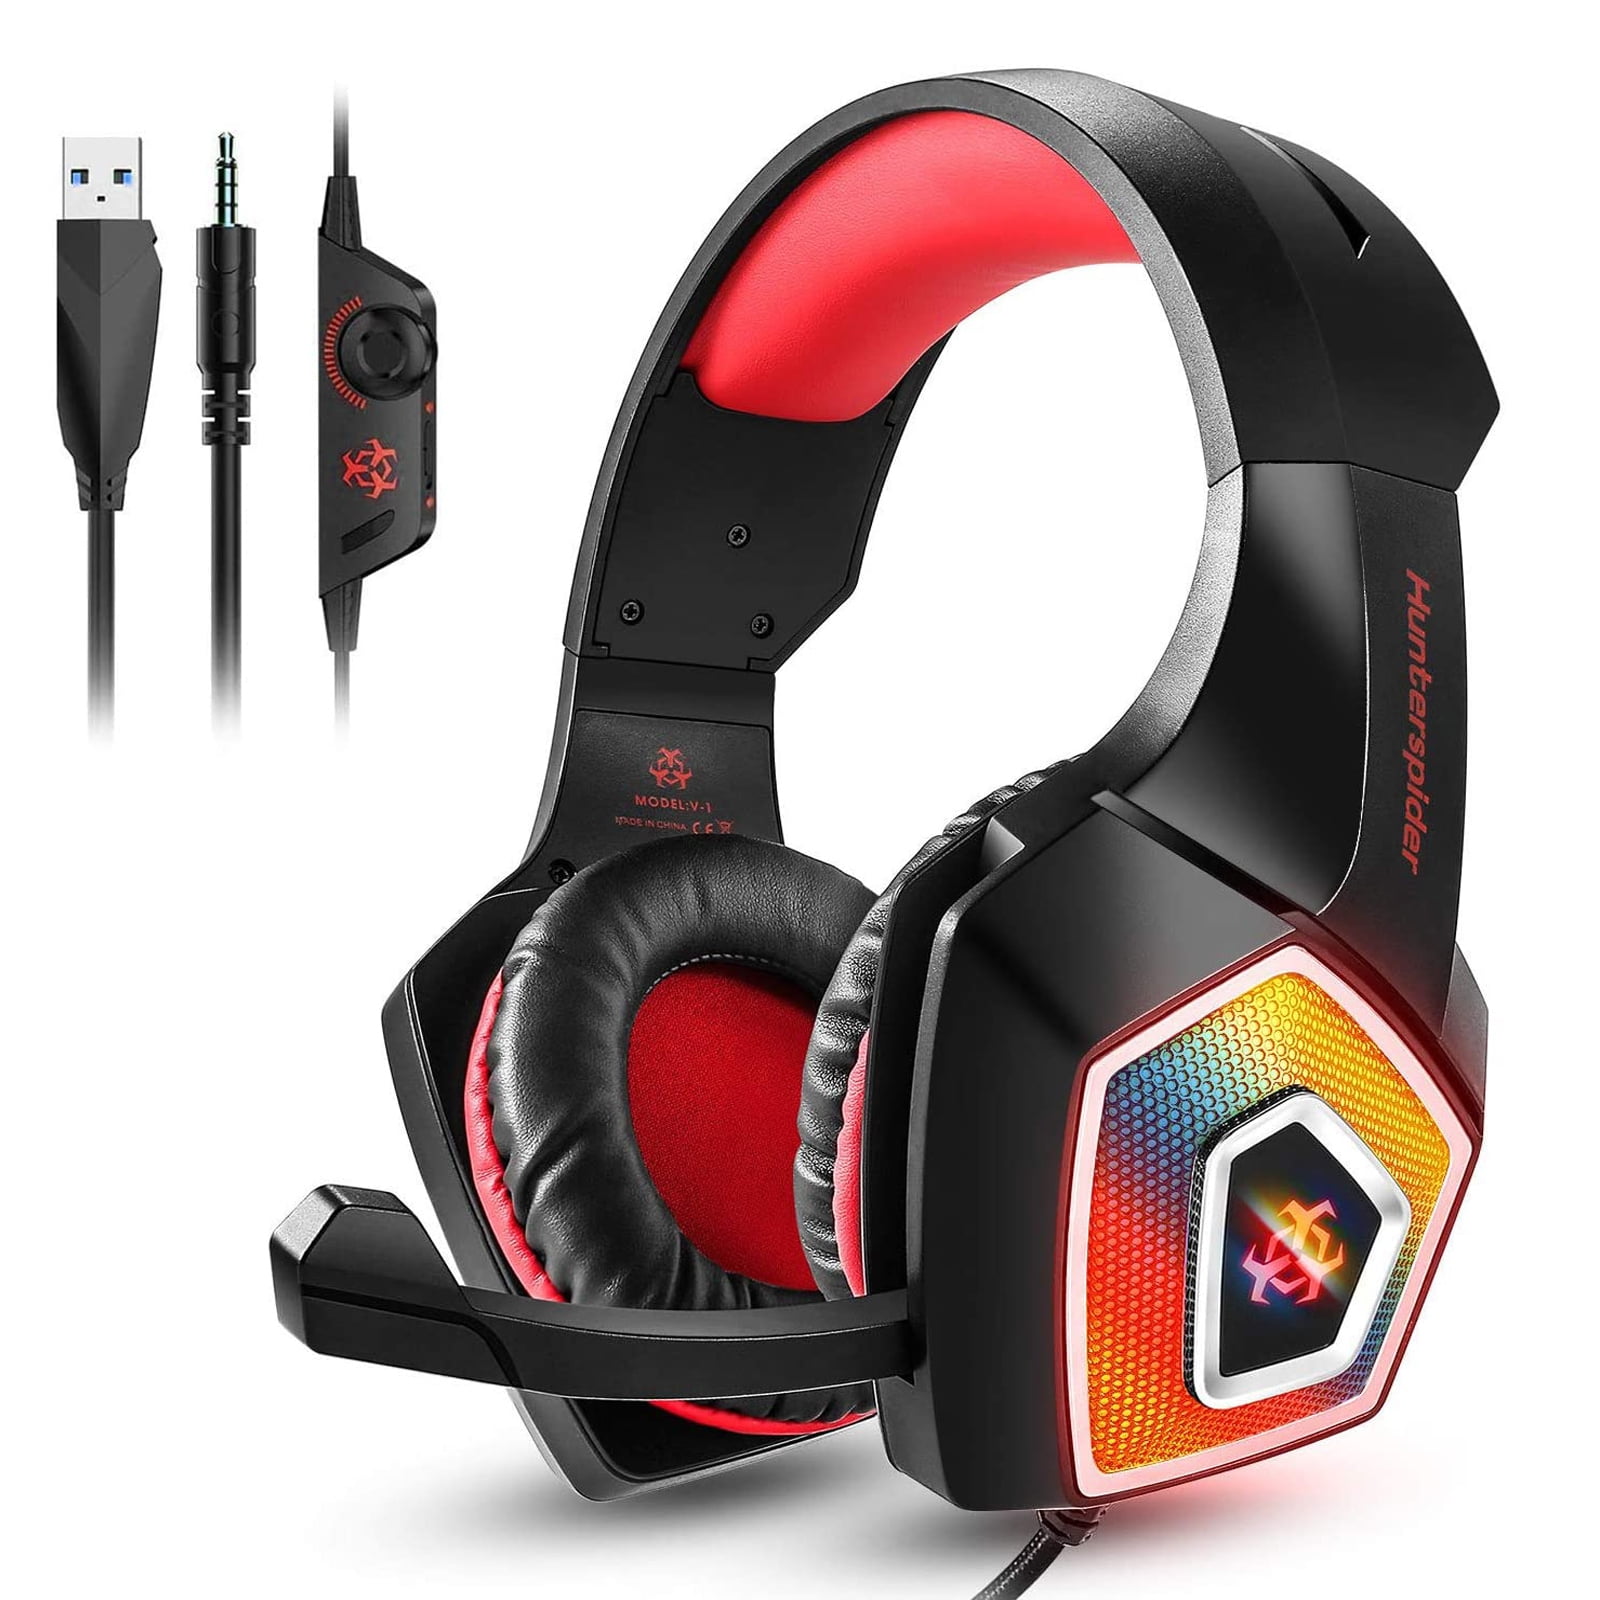 Policía repertorio predicción Gaming Headset with Mic for Xbox One PS4 PS5 PC Switch Tablet Smartphone,  Headphones Stereo Over Ear Bass 3.5mm Microphone Noise Canceling 7 LED  Light Soft Memory Earmuffs (Free Adapter) - Walmart.com